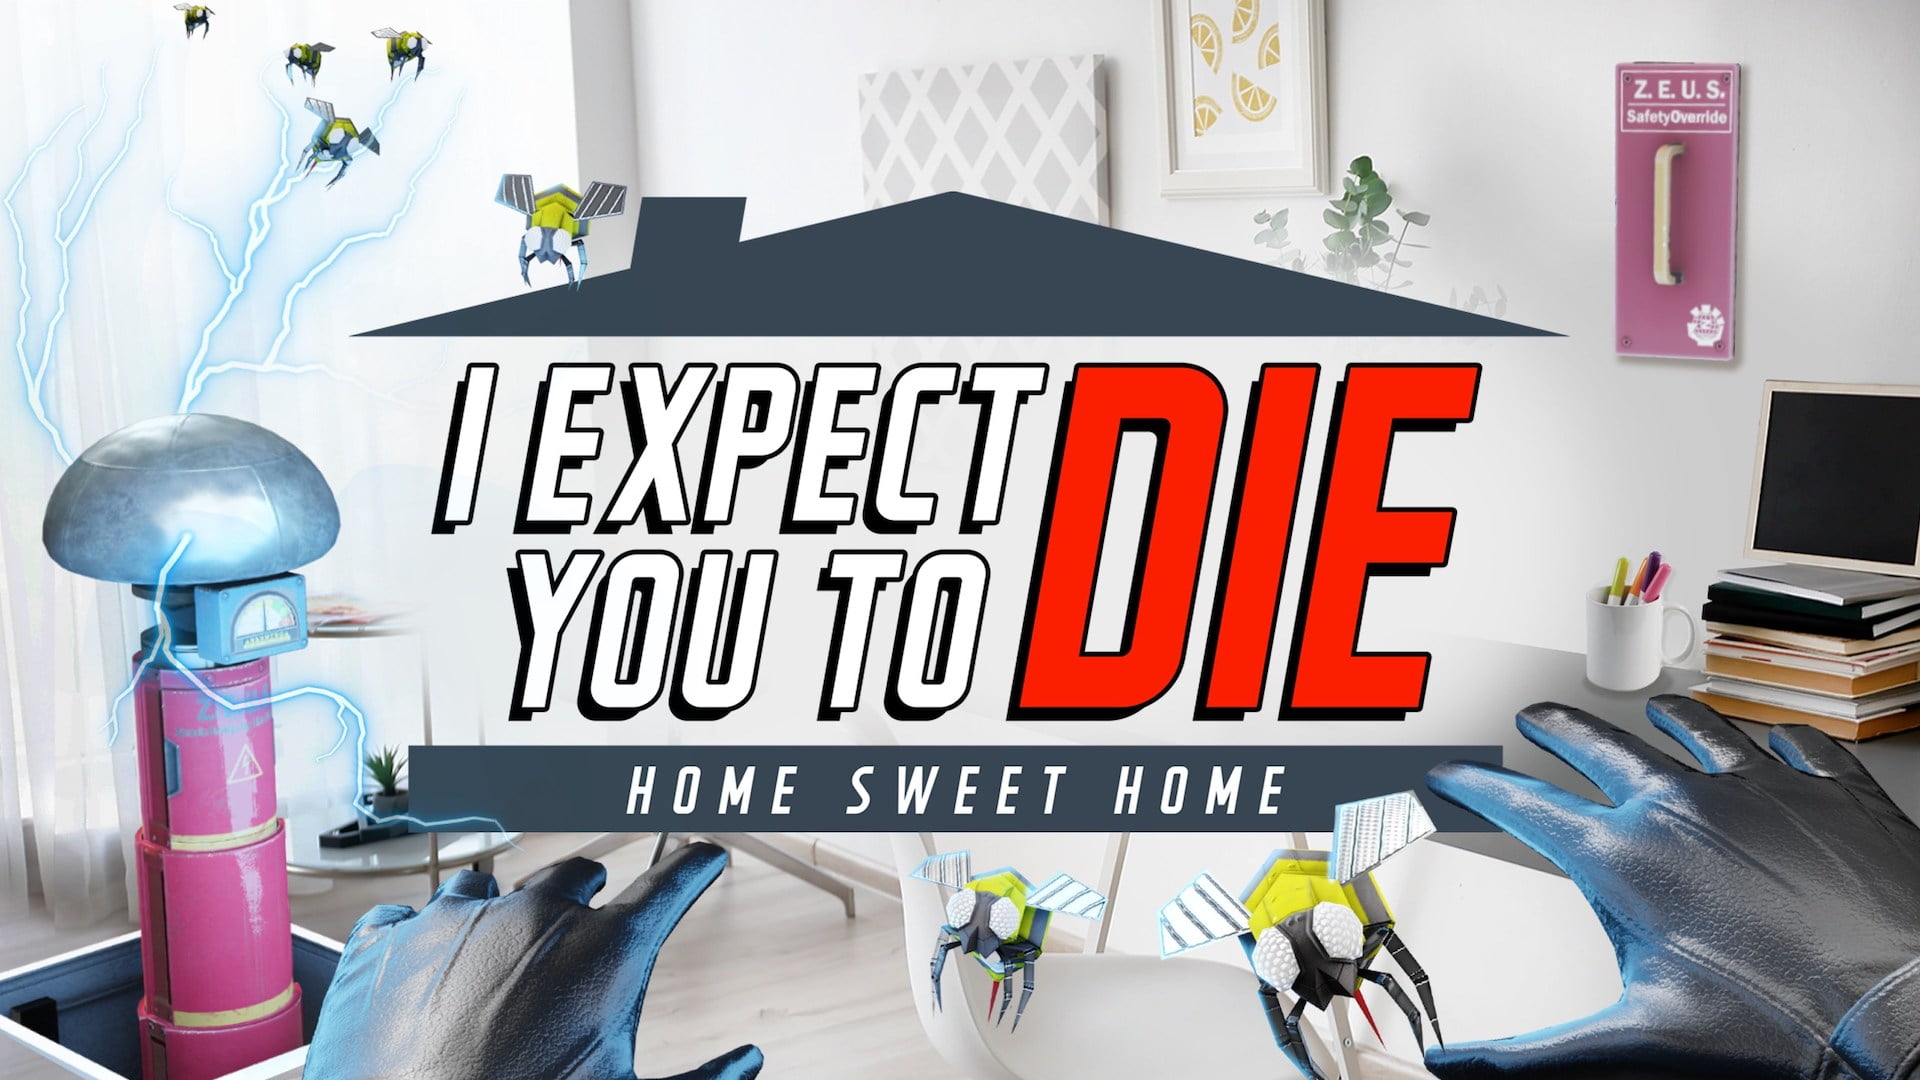 “I Expect You to Die: Home Sweet Home” shows the pros and cons of mixed reality